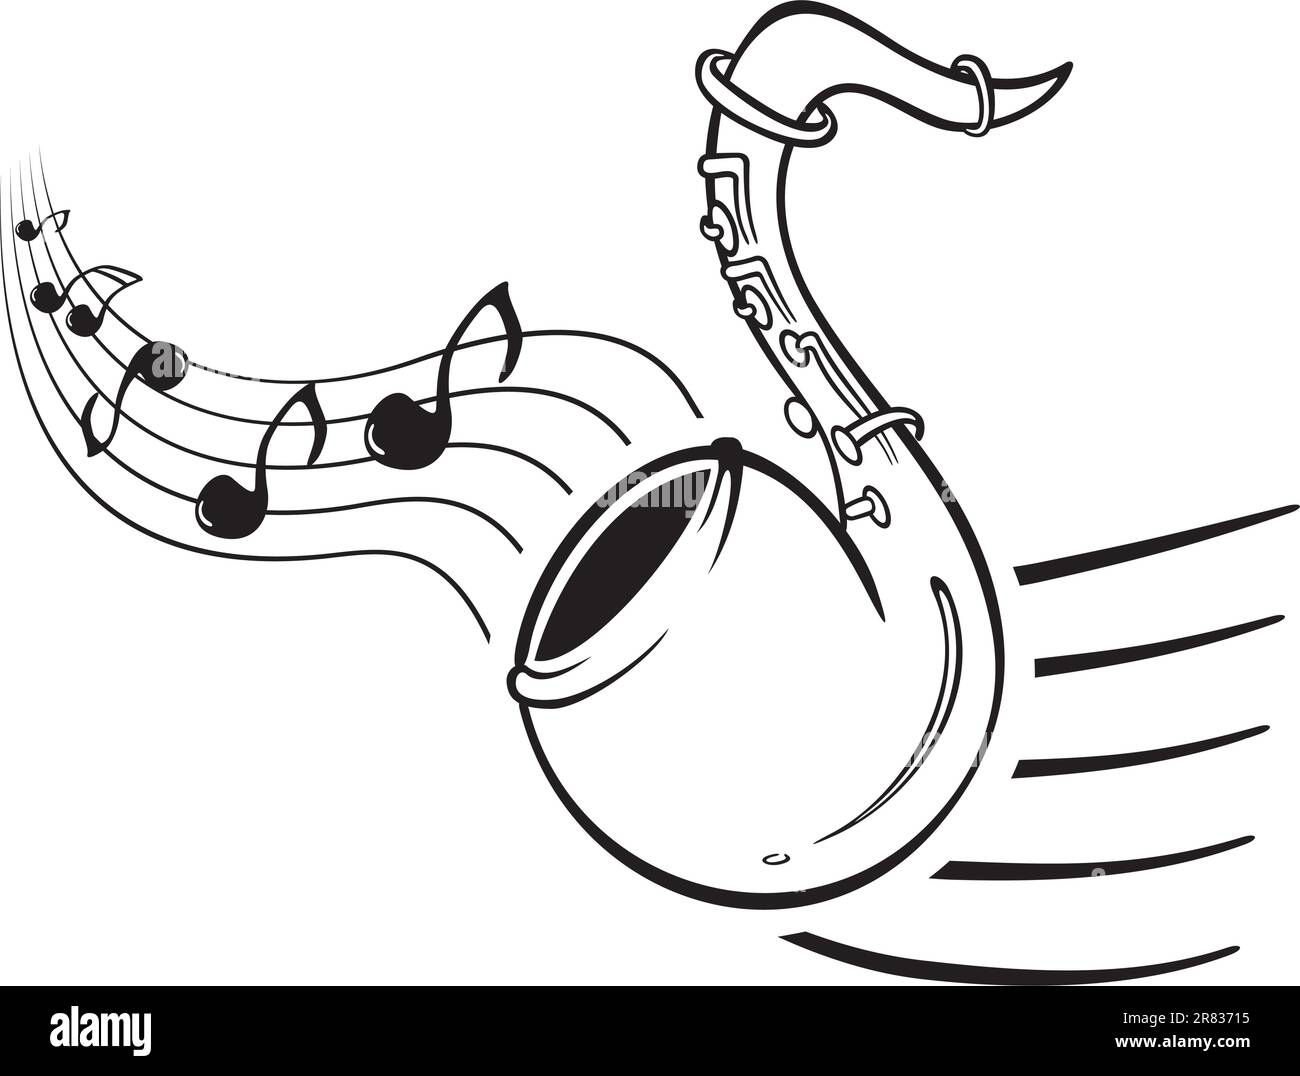 Sax Stock Vector Images - Alamy